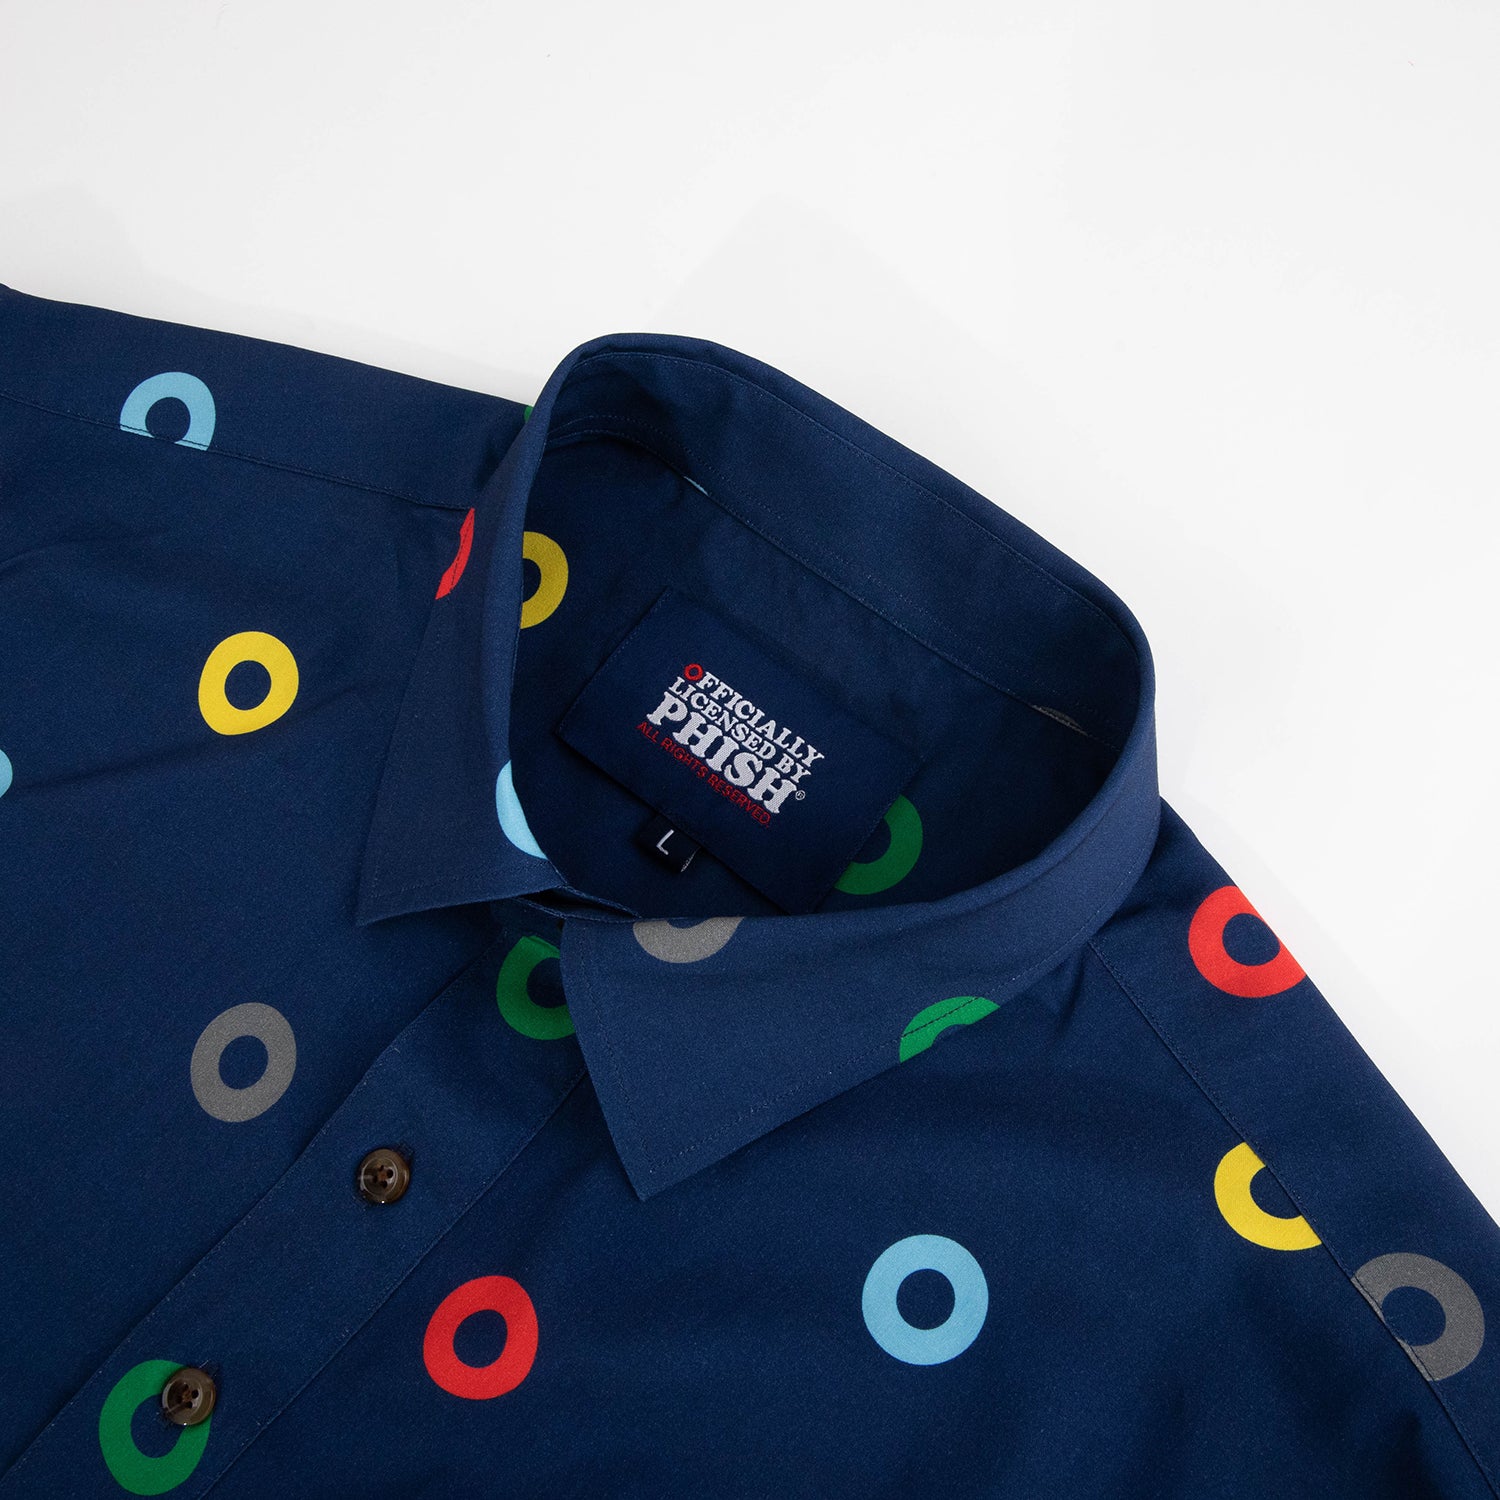 Phish Relaxed Short Sleeve Button Down Donut All Over Navy - Section 119